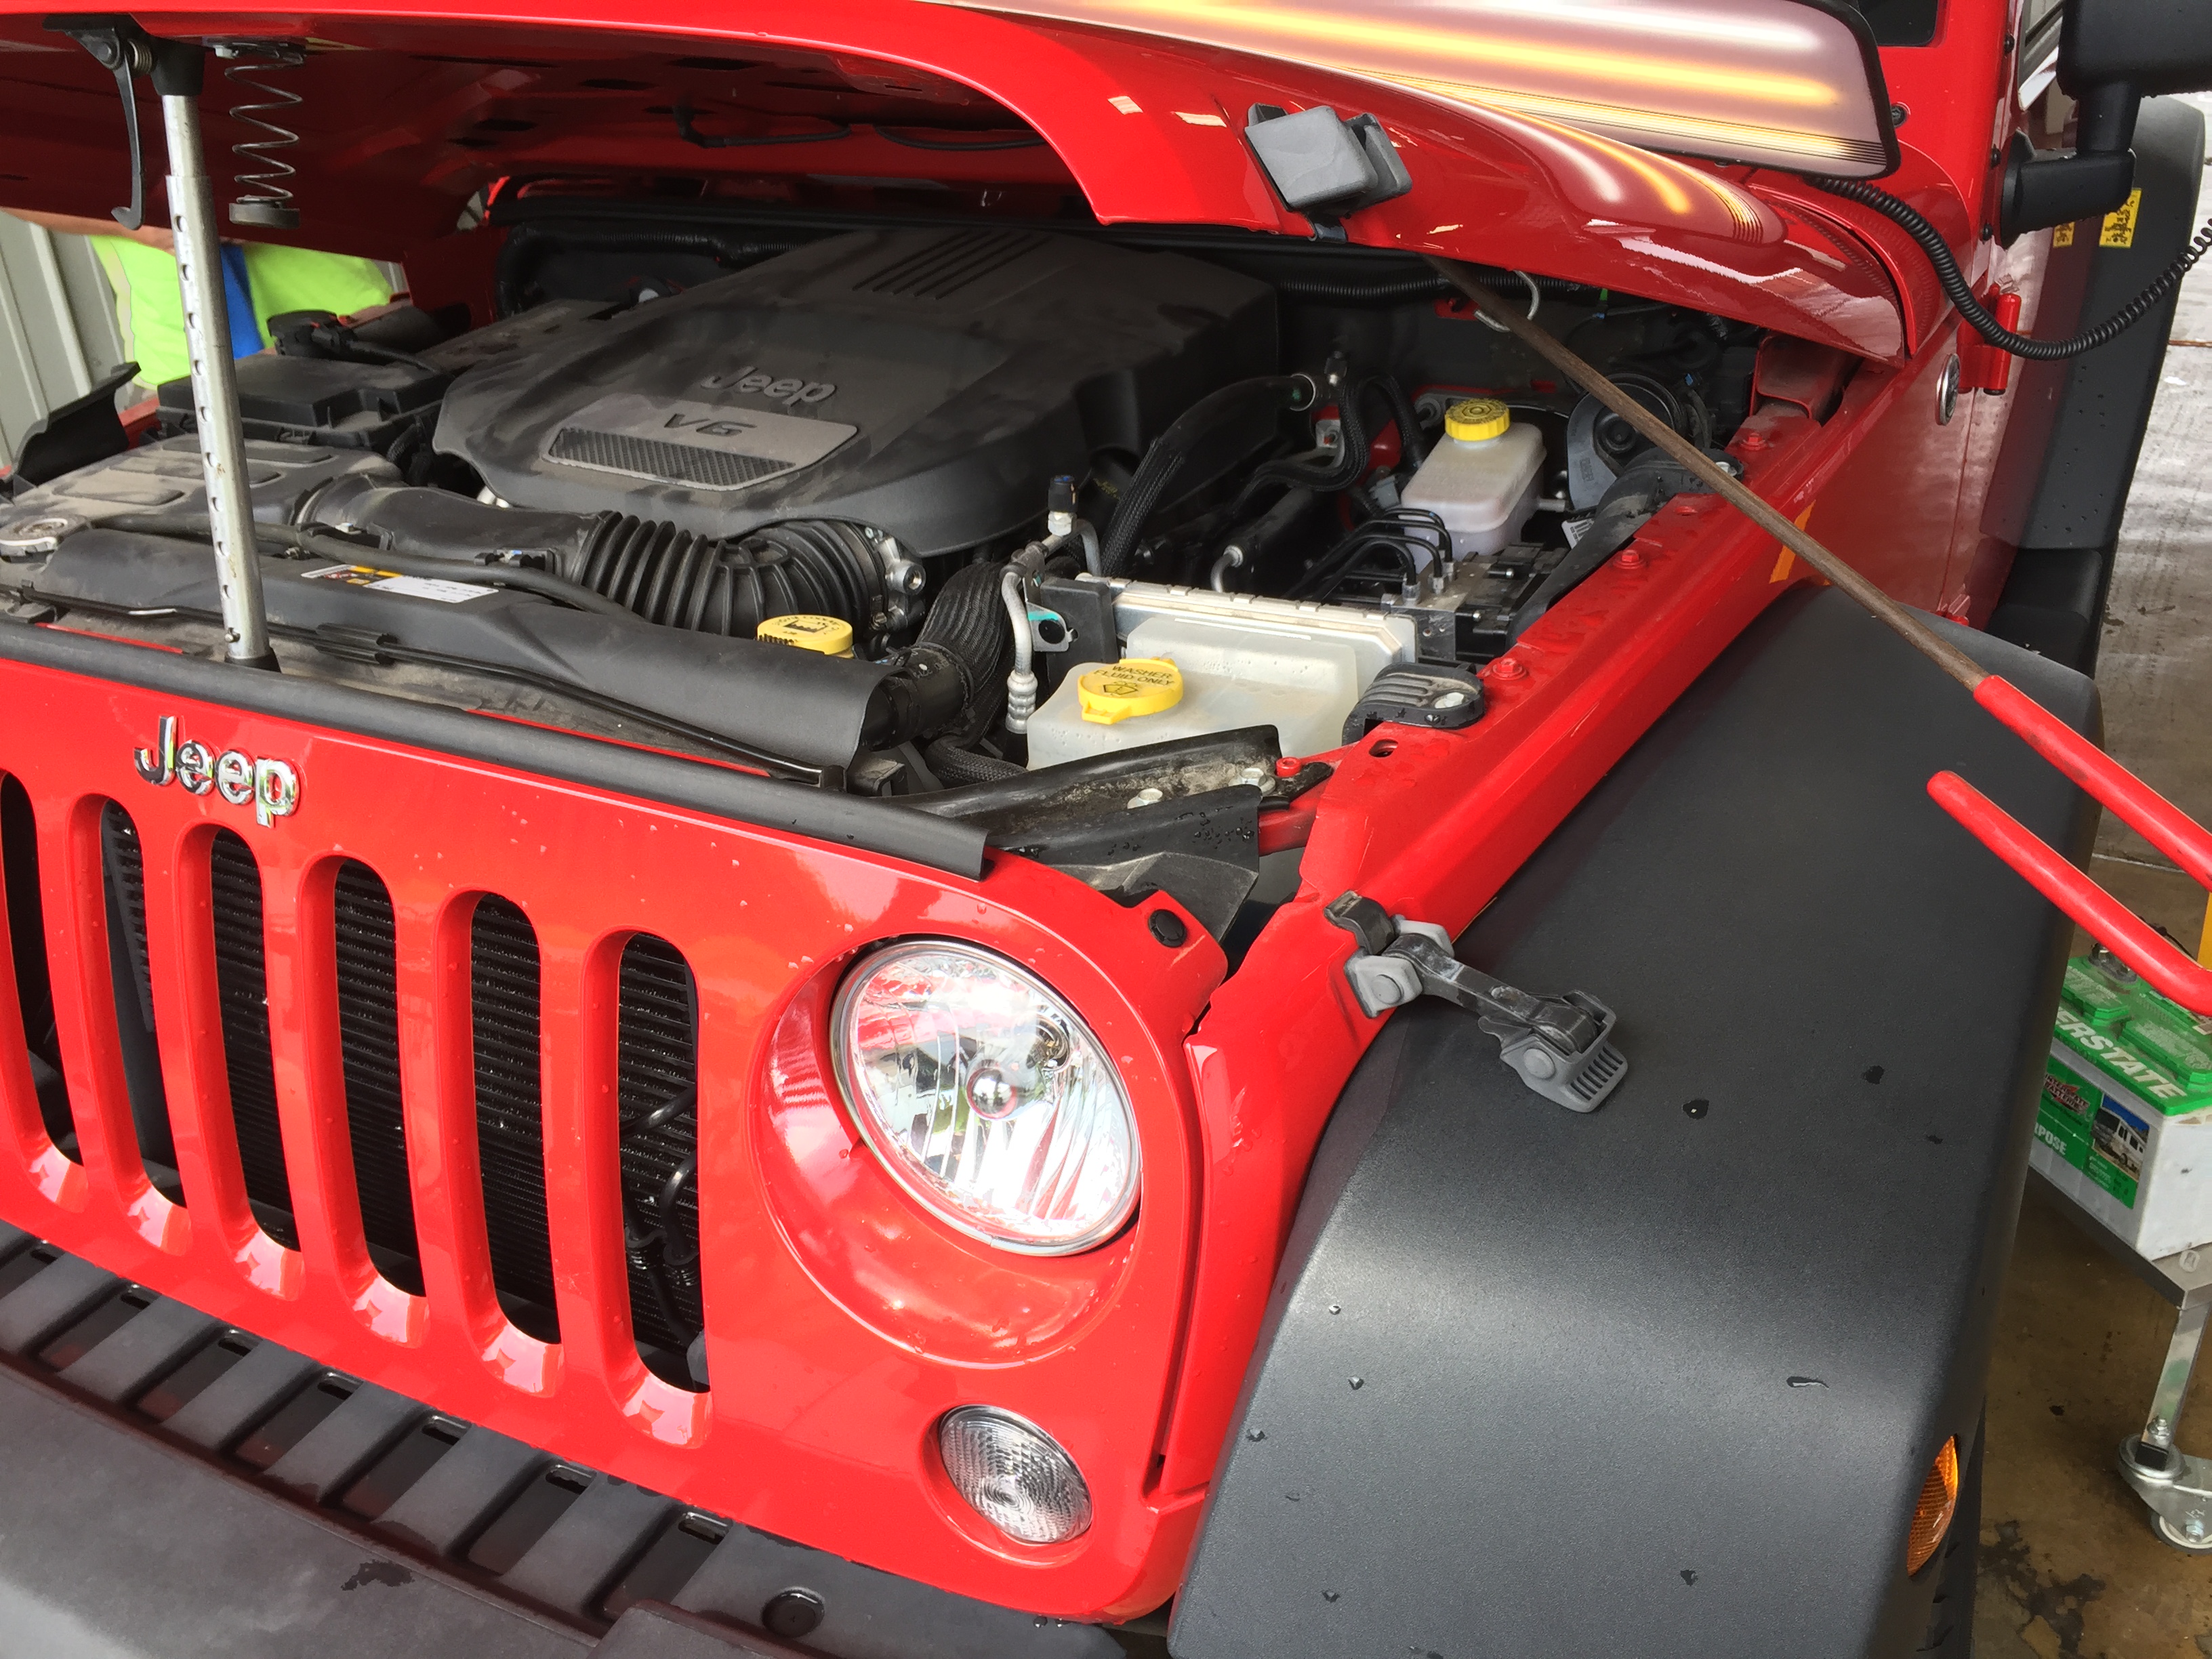 2014 Jeep Wrangler Dent Removal, Hail Damage on Hood. Springfield, IL. Paintless Dent Removal by Michael Bocek with http://217dent.com